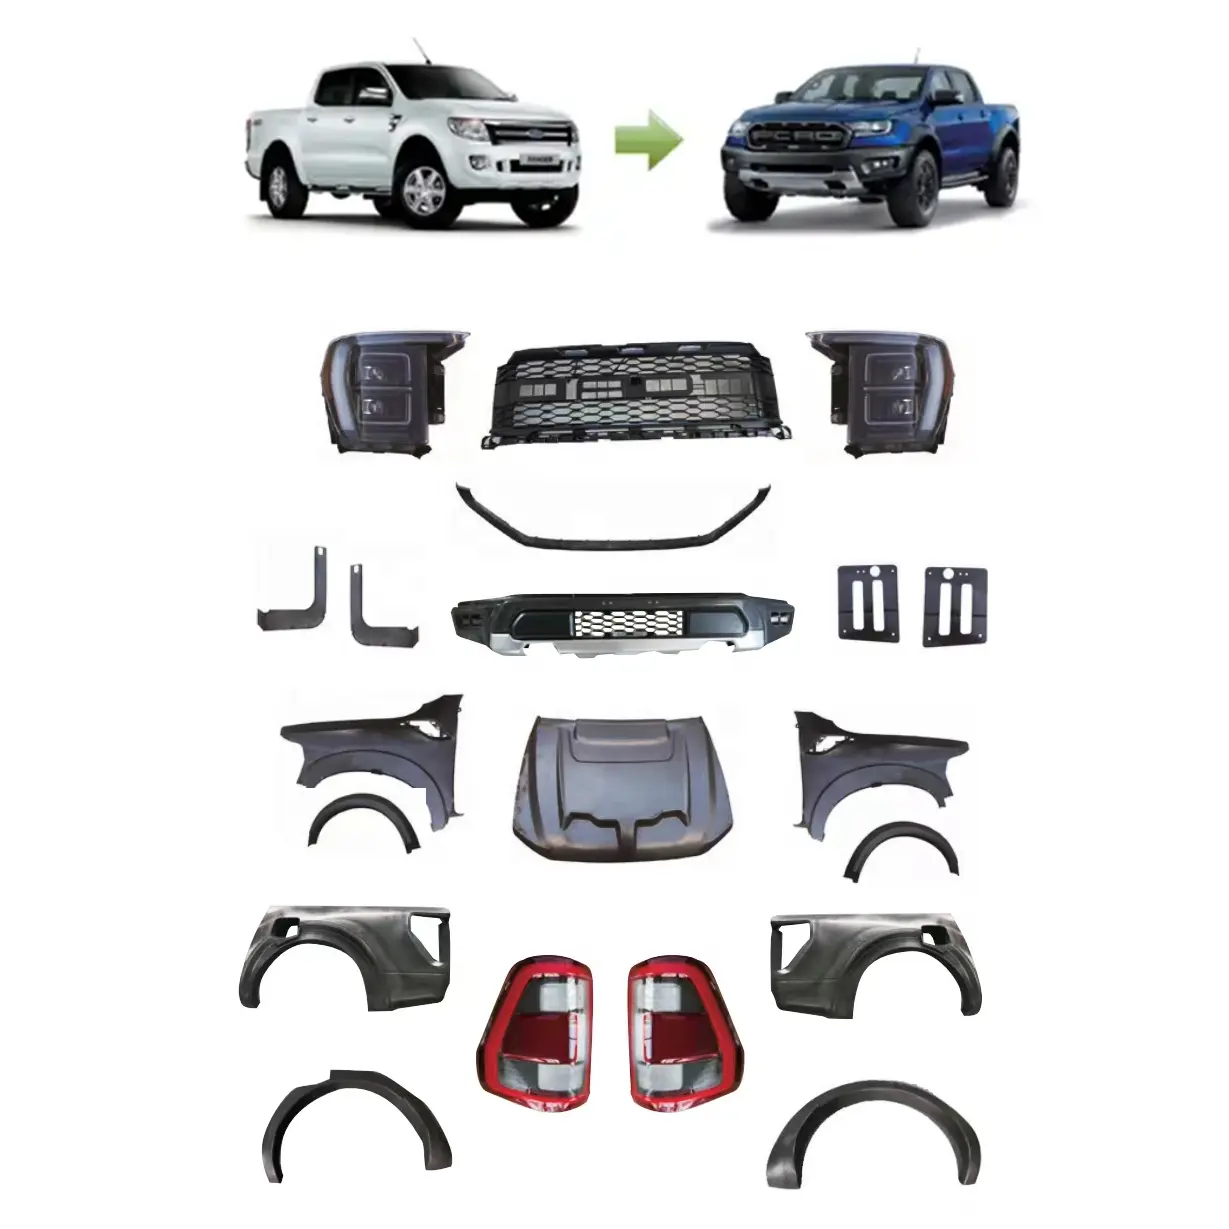 High quality Car Modified old style to new Body Kits for 2012-2021 Ranger body Kit Upgrade 2022 F150 Raptor body kit